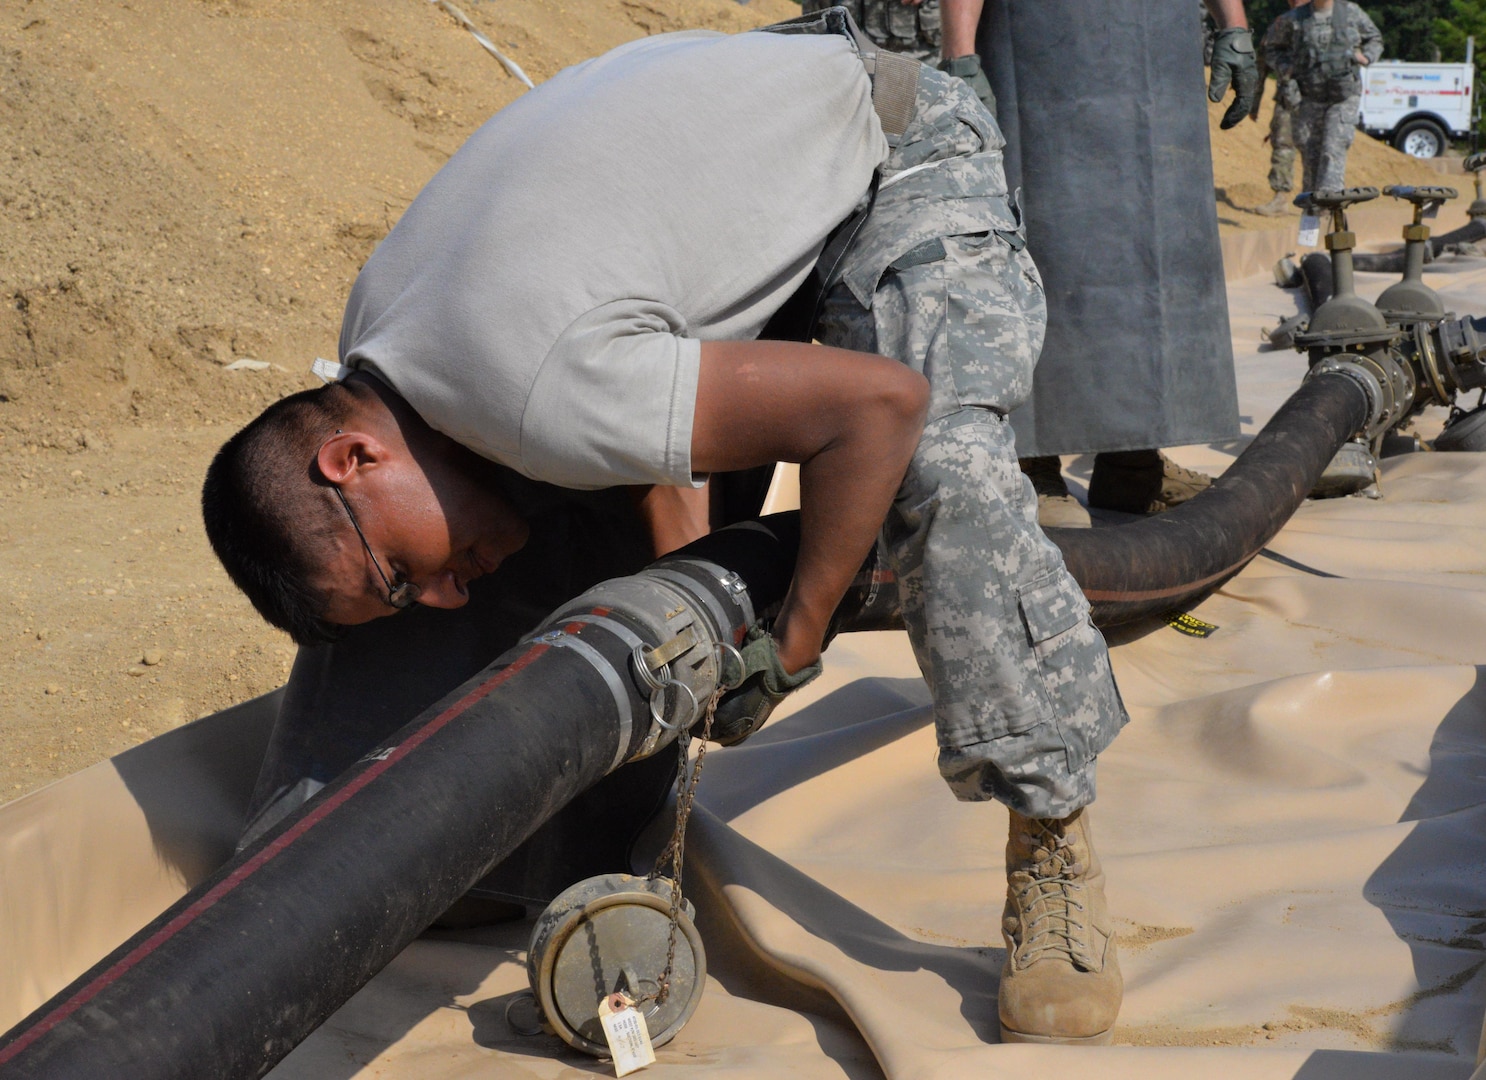 Army Sgt. Benjamin Santa Maria, 947th Quartermaster Company, checks for a fuel leak during a Quartermaster Liquid Logistic Exercise at Joint Base McGuire-Dix-Lakehurst, N.J., July 19, 2017. The exercise tested the Soldiers capability to safely and efficiently receive incoming fuel trucks and download thousands of gallons fuel. Once the fuel was received, the Soldiers cleaned and recirculated it before refilling trucks awaiting resupply. 